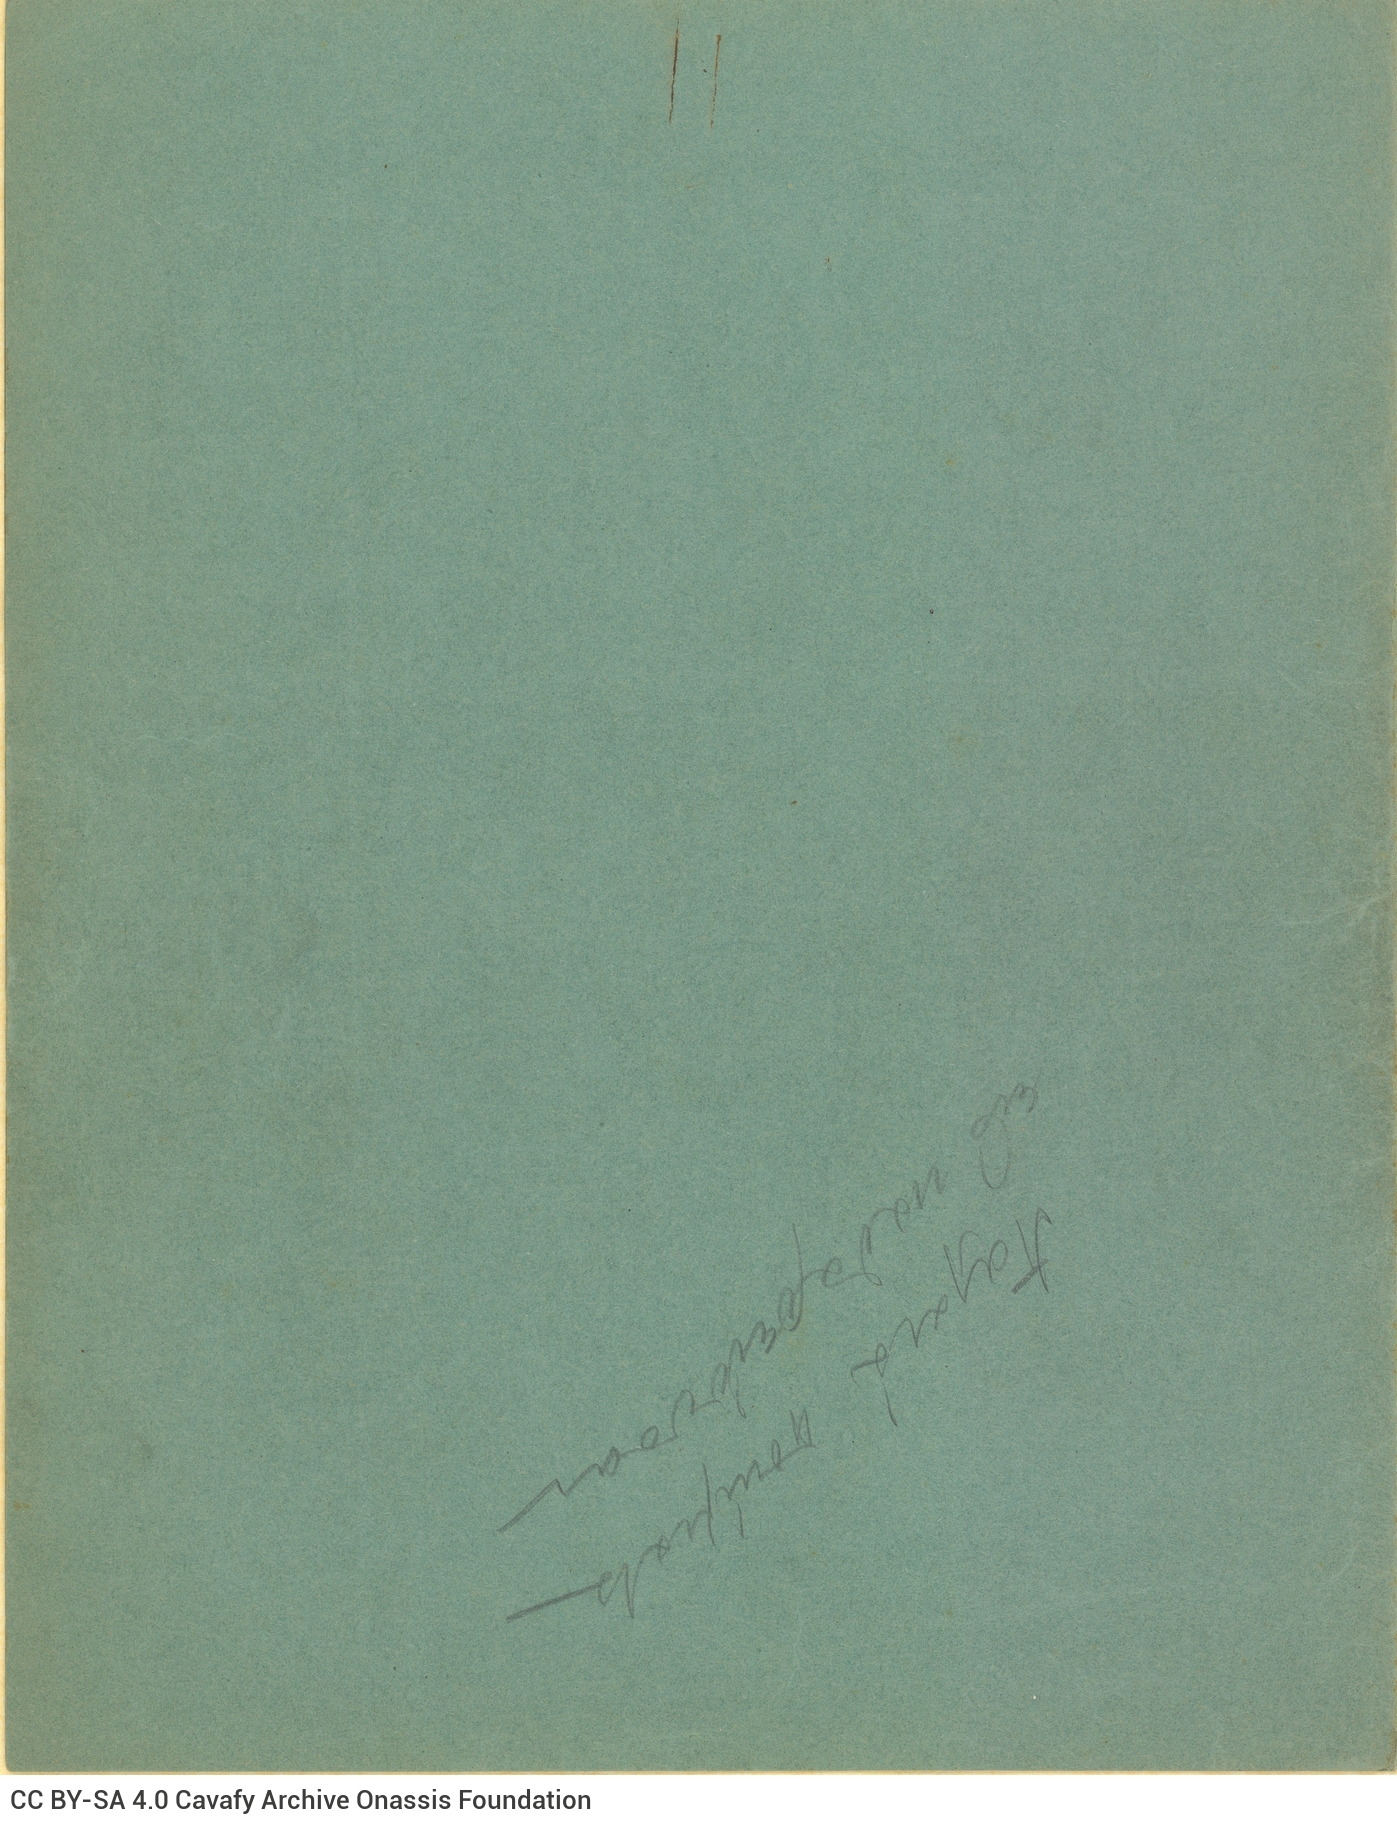 Green paperboard folder. On the first page, the handwritten title "Poems written in katharevousa". On the second and third